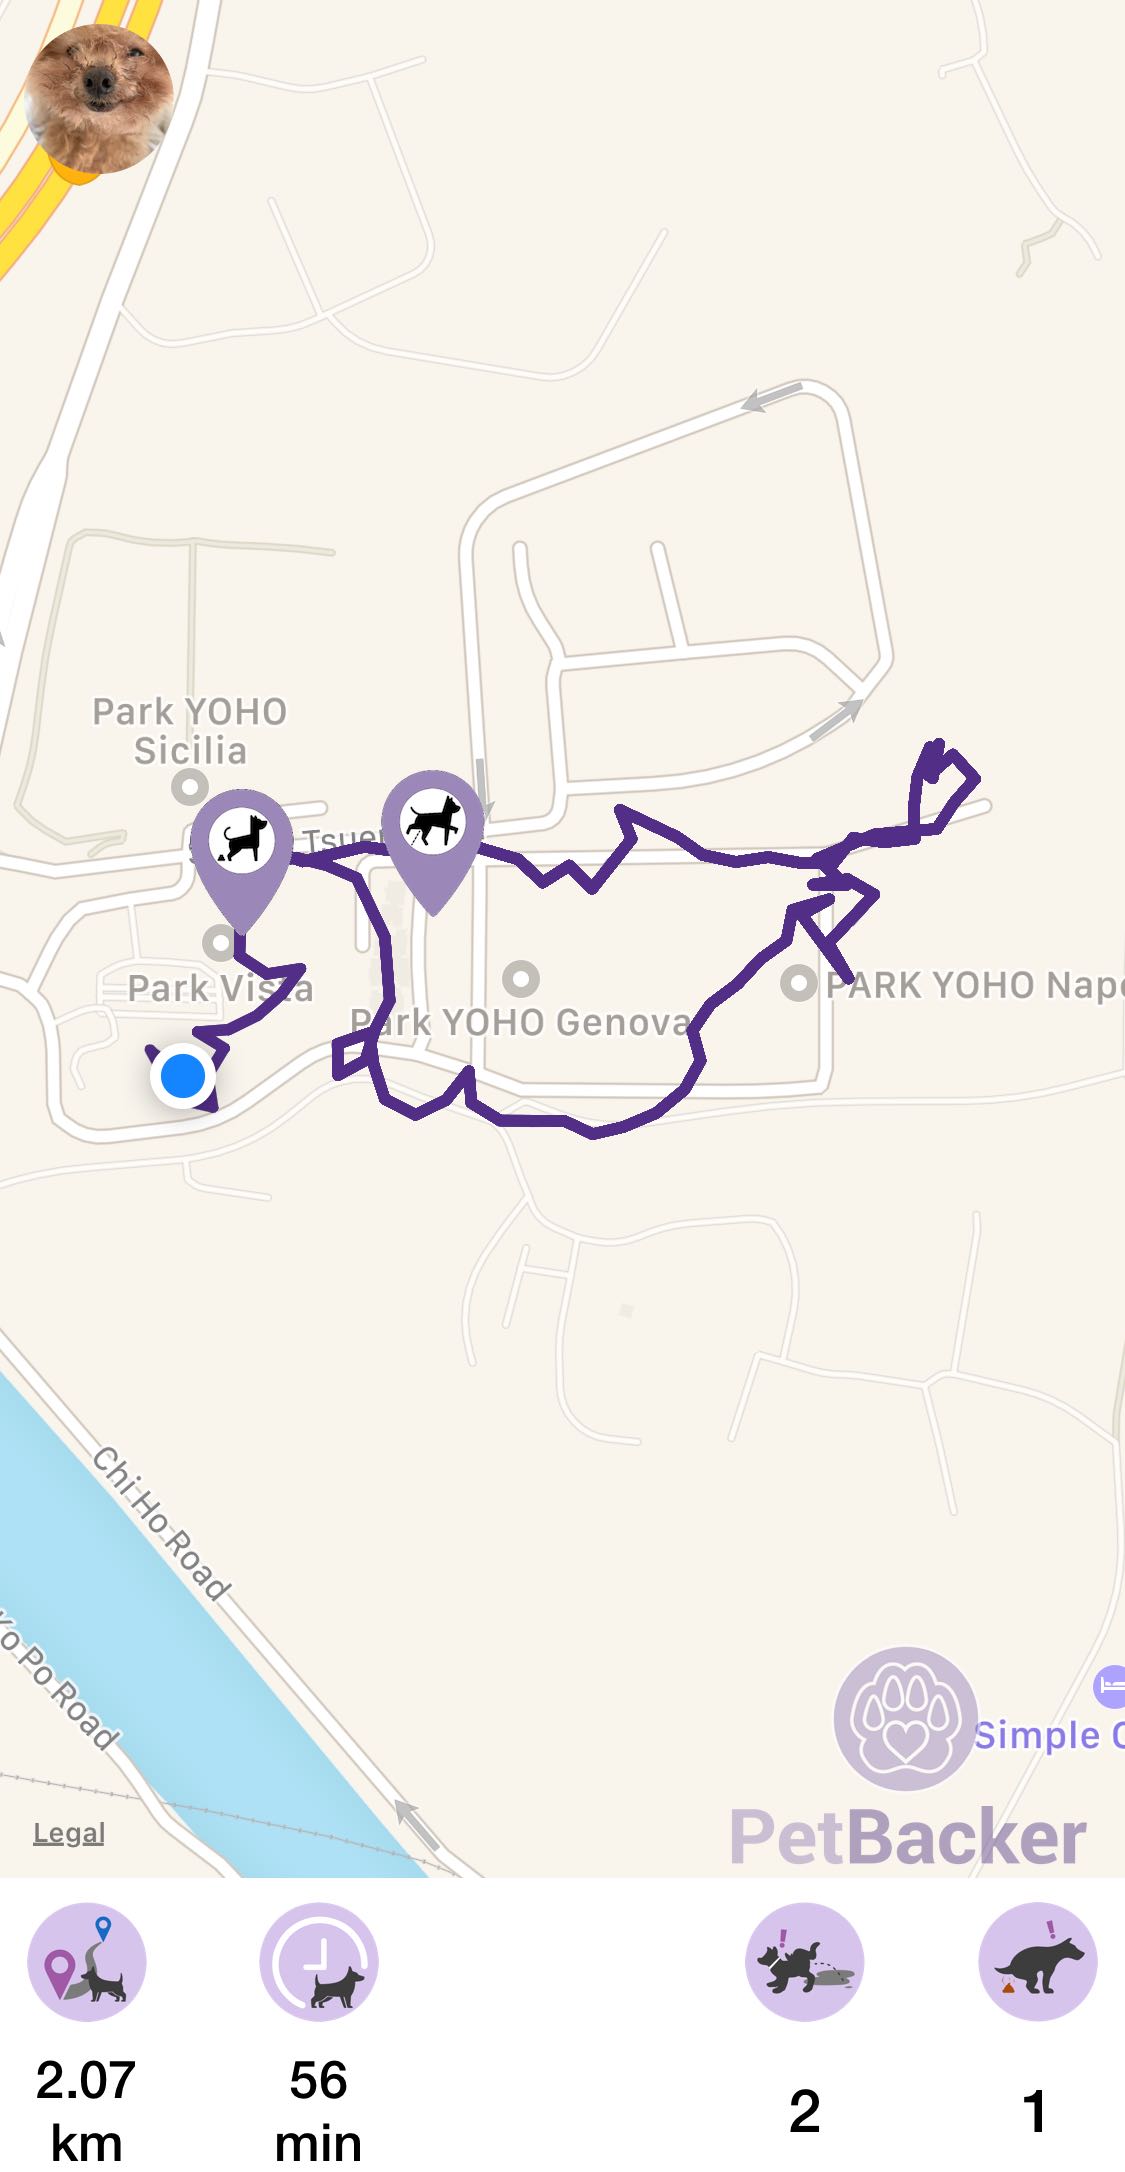 Just completed pet walking of 2.07 km